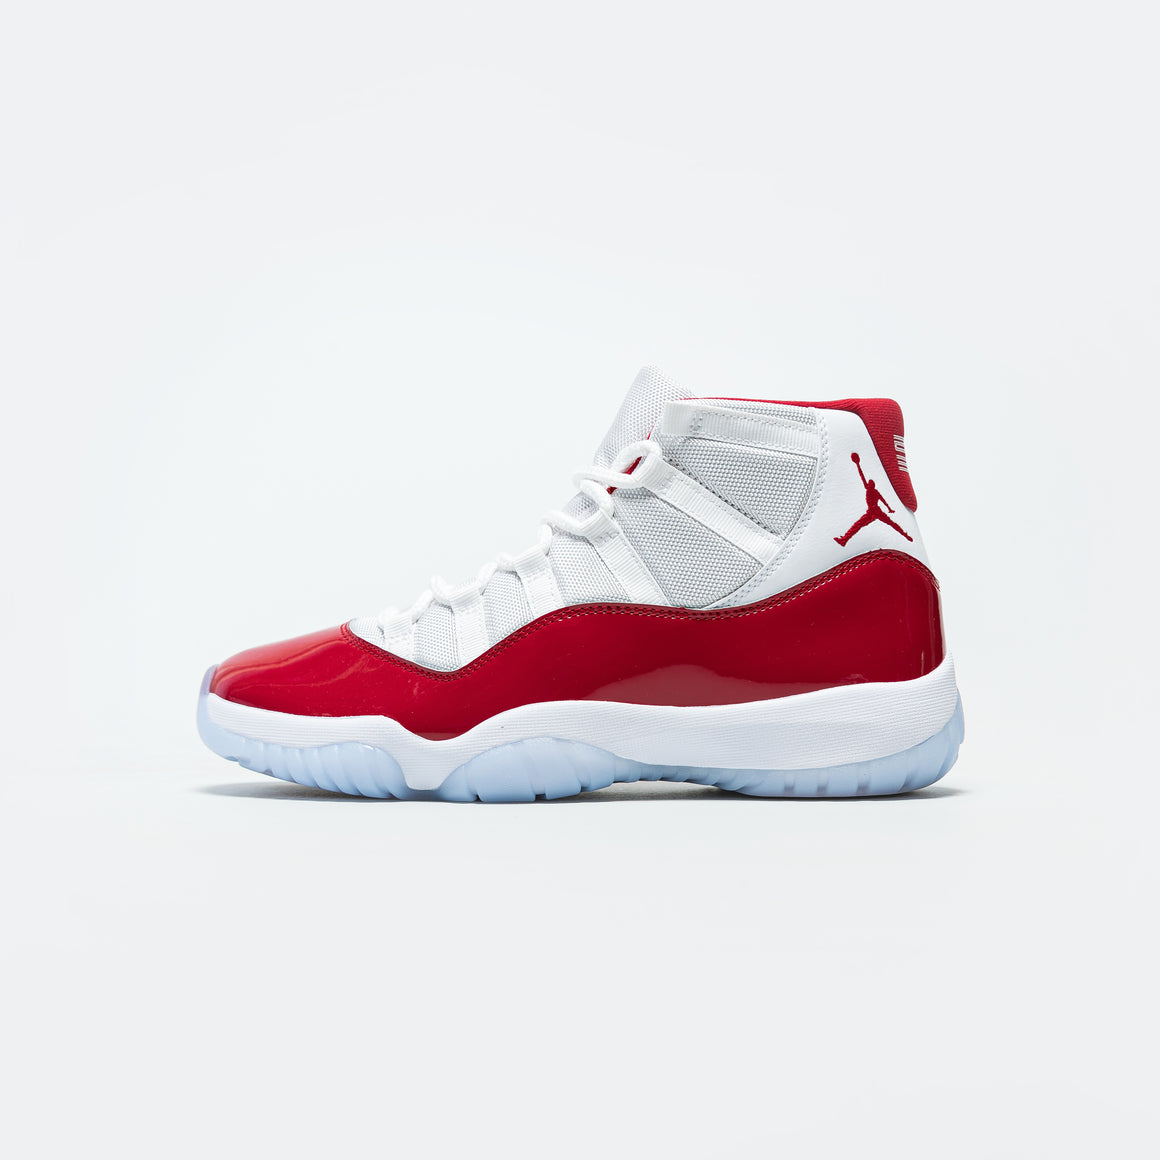 red and white 11s jordans